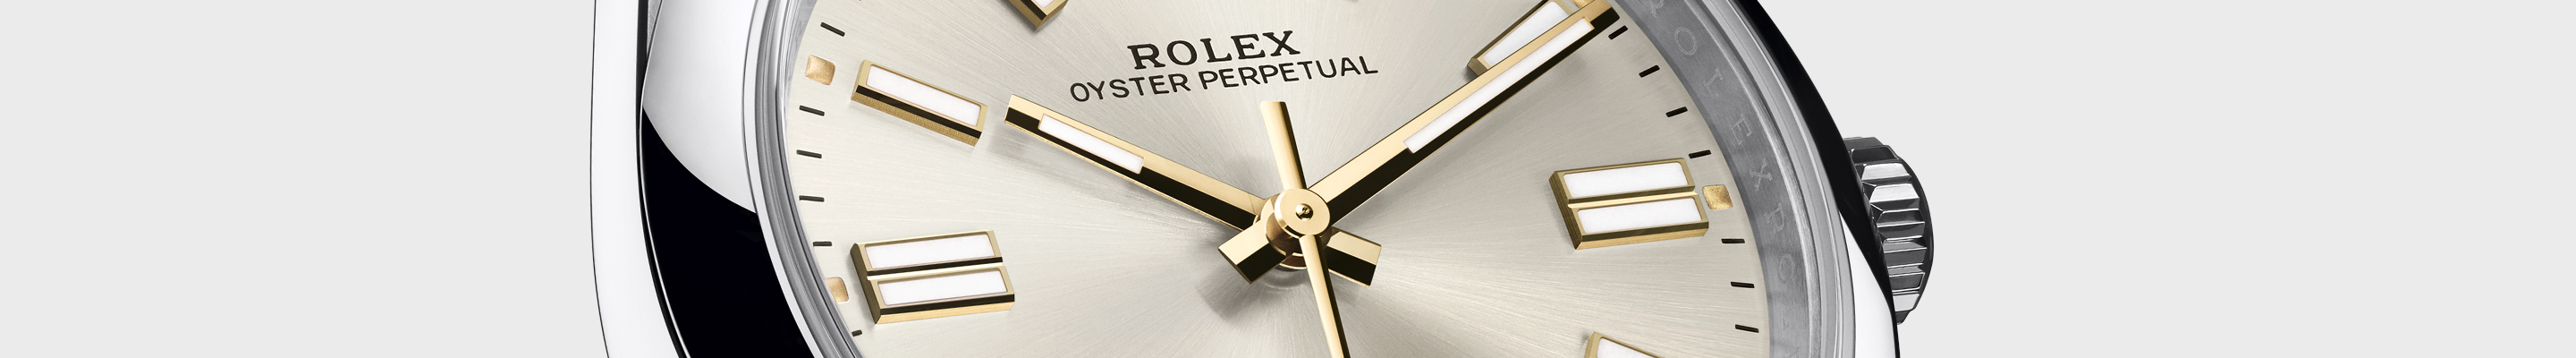 Oyster Perpetual Banner Image